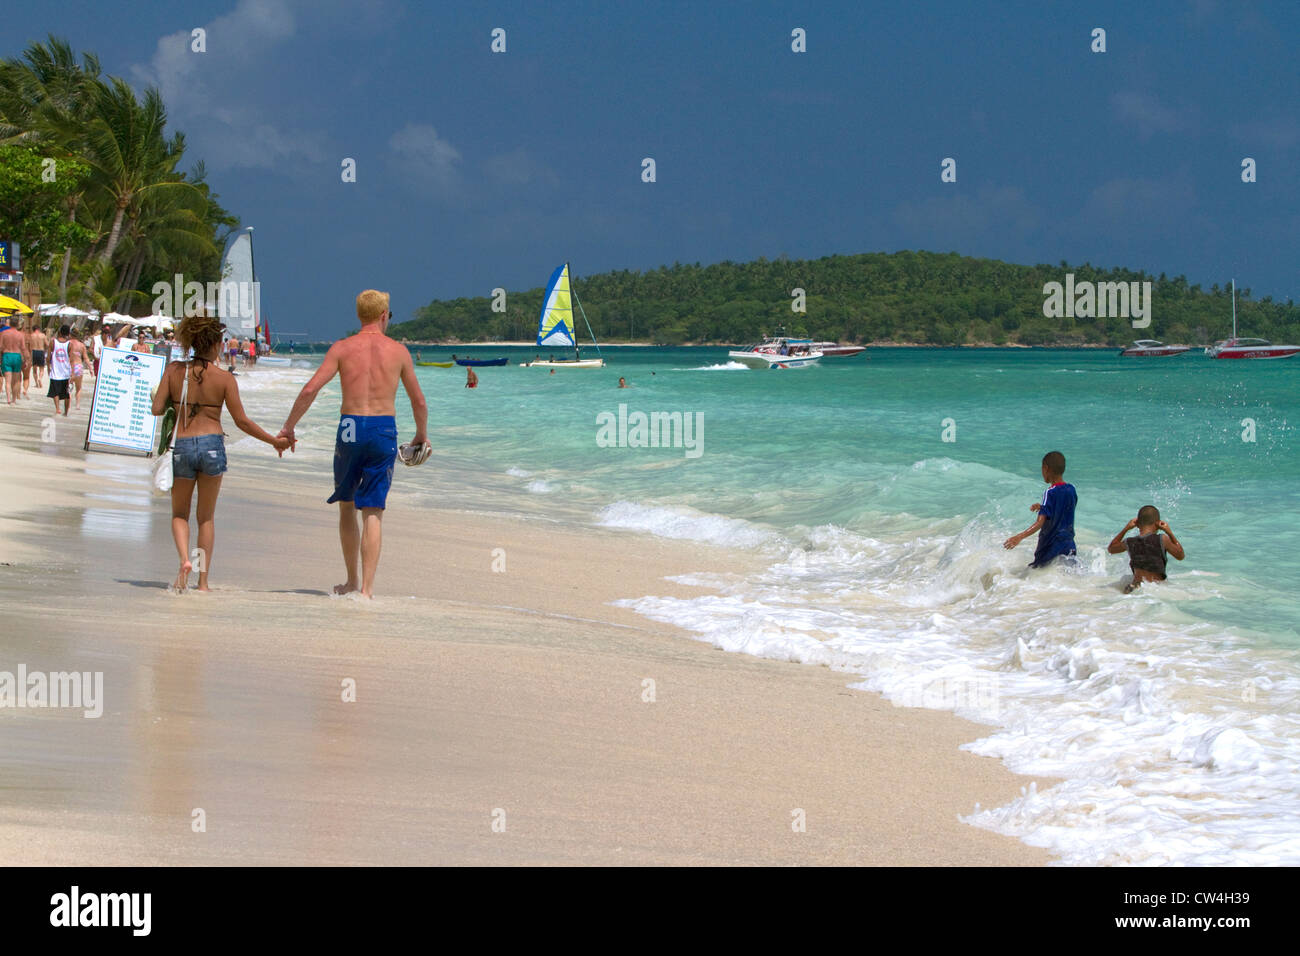 People walk hand in hand along the Gulf of Thailand at Chaweng beach on the island of Ko Samui, Thailand. Stock Photo